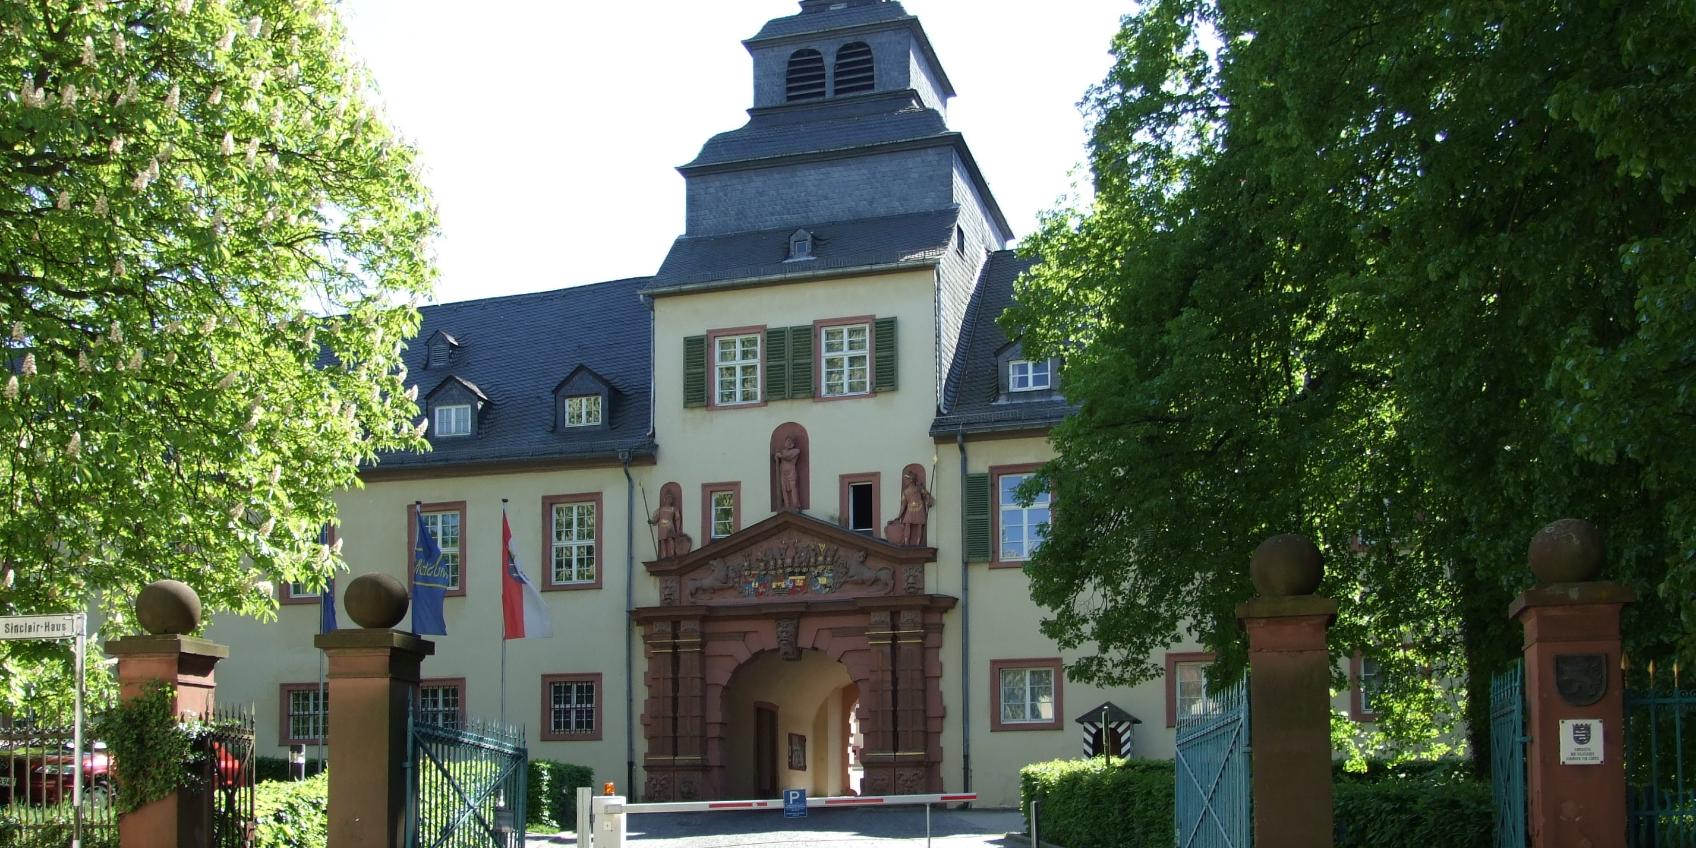 Schloss-Eingang Herrngasse (c) Von dontworry - Eigenes Werk, CC BY-SA 3.0, https://commons.wikimedia.org/w/index.php?curid=2206711